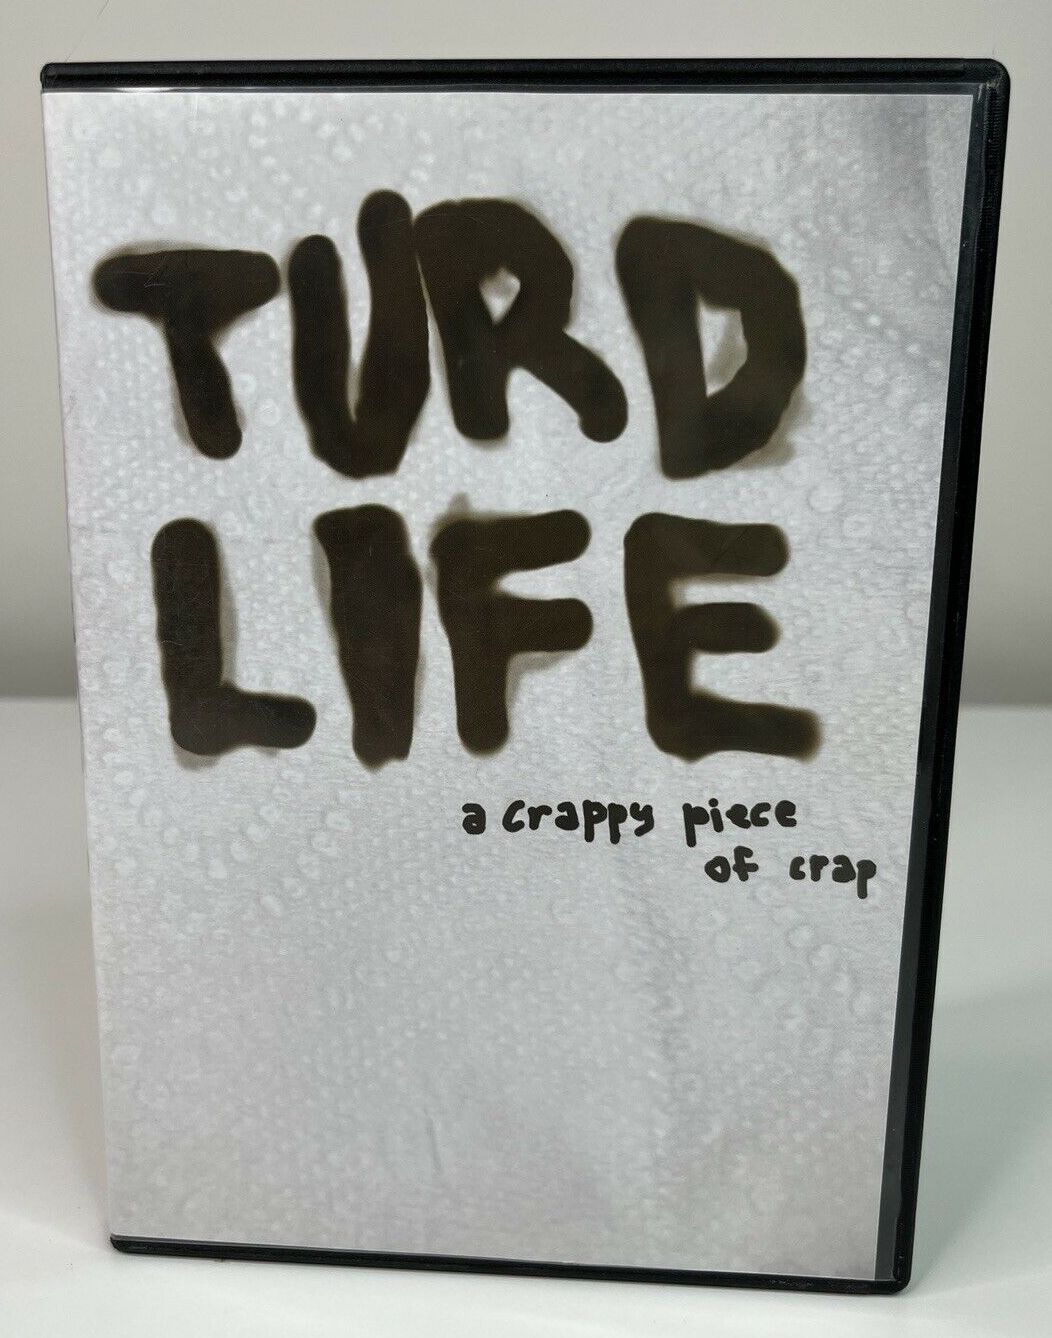 Turd Life cover